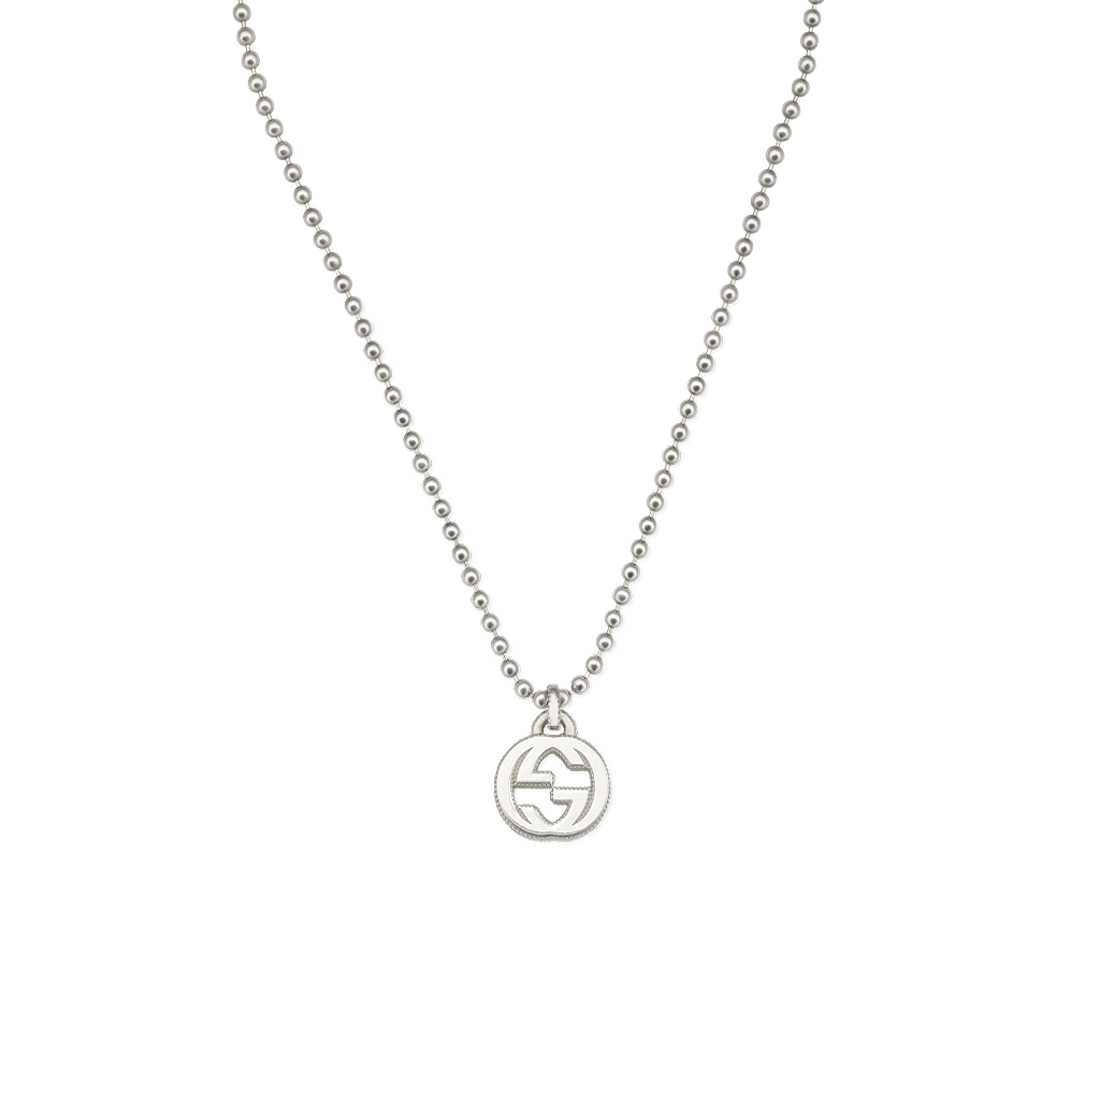 Gucci Necklace With Interlocking G Pendant in Silver